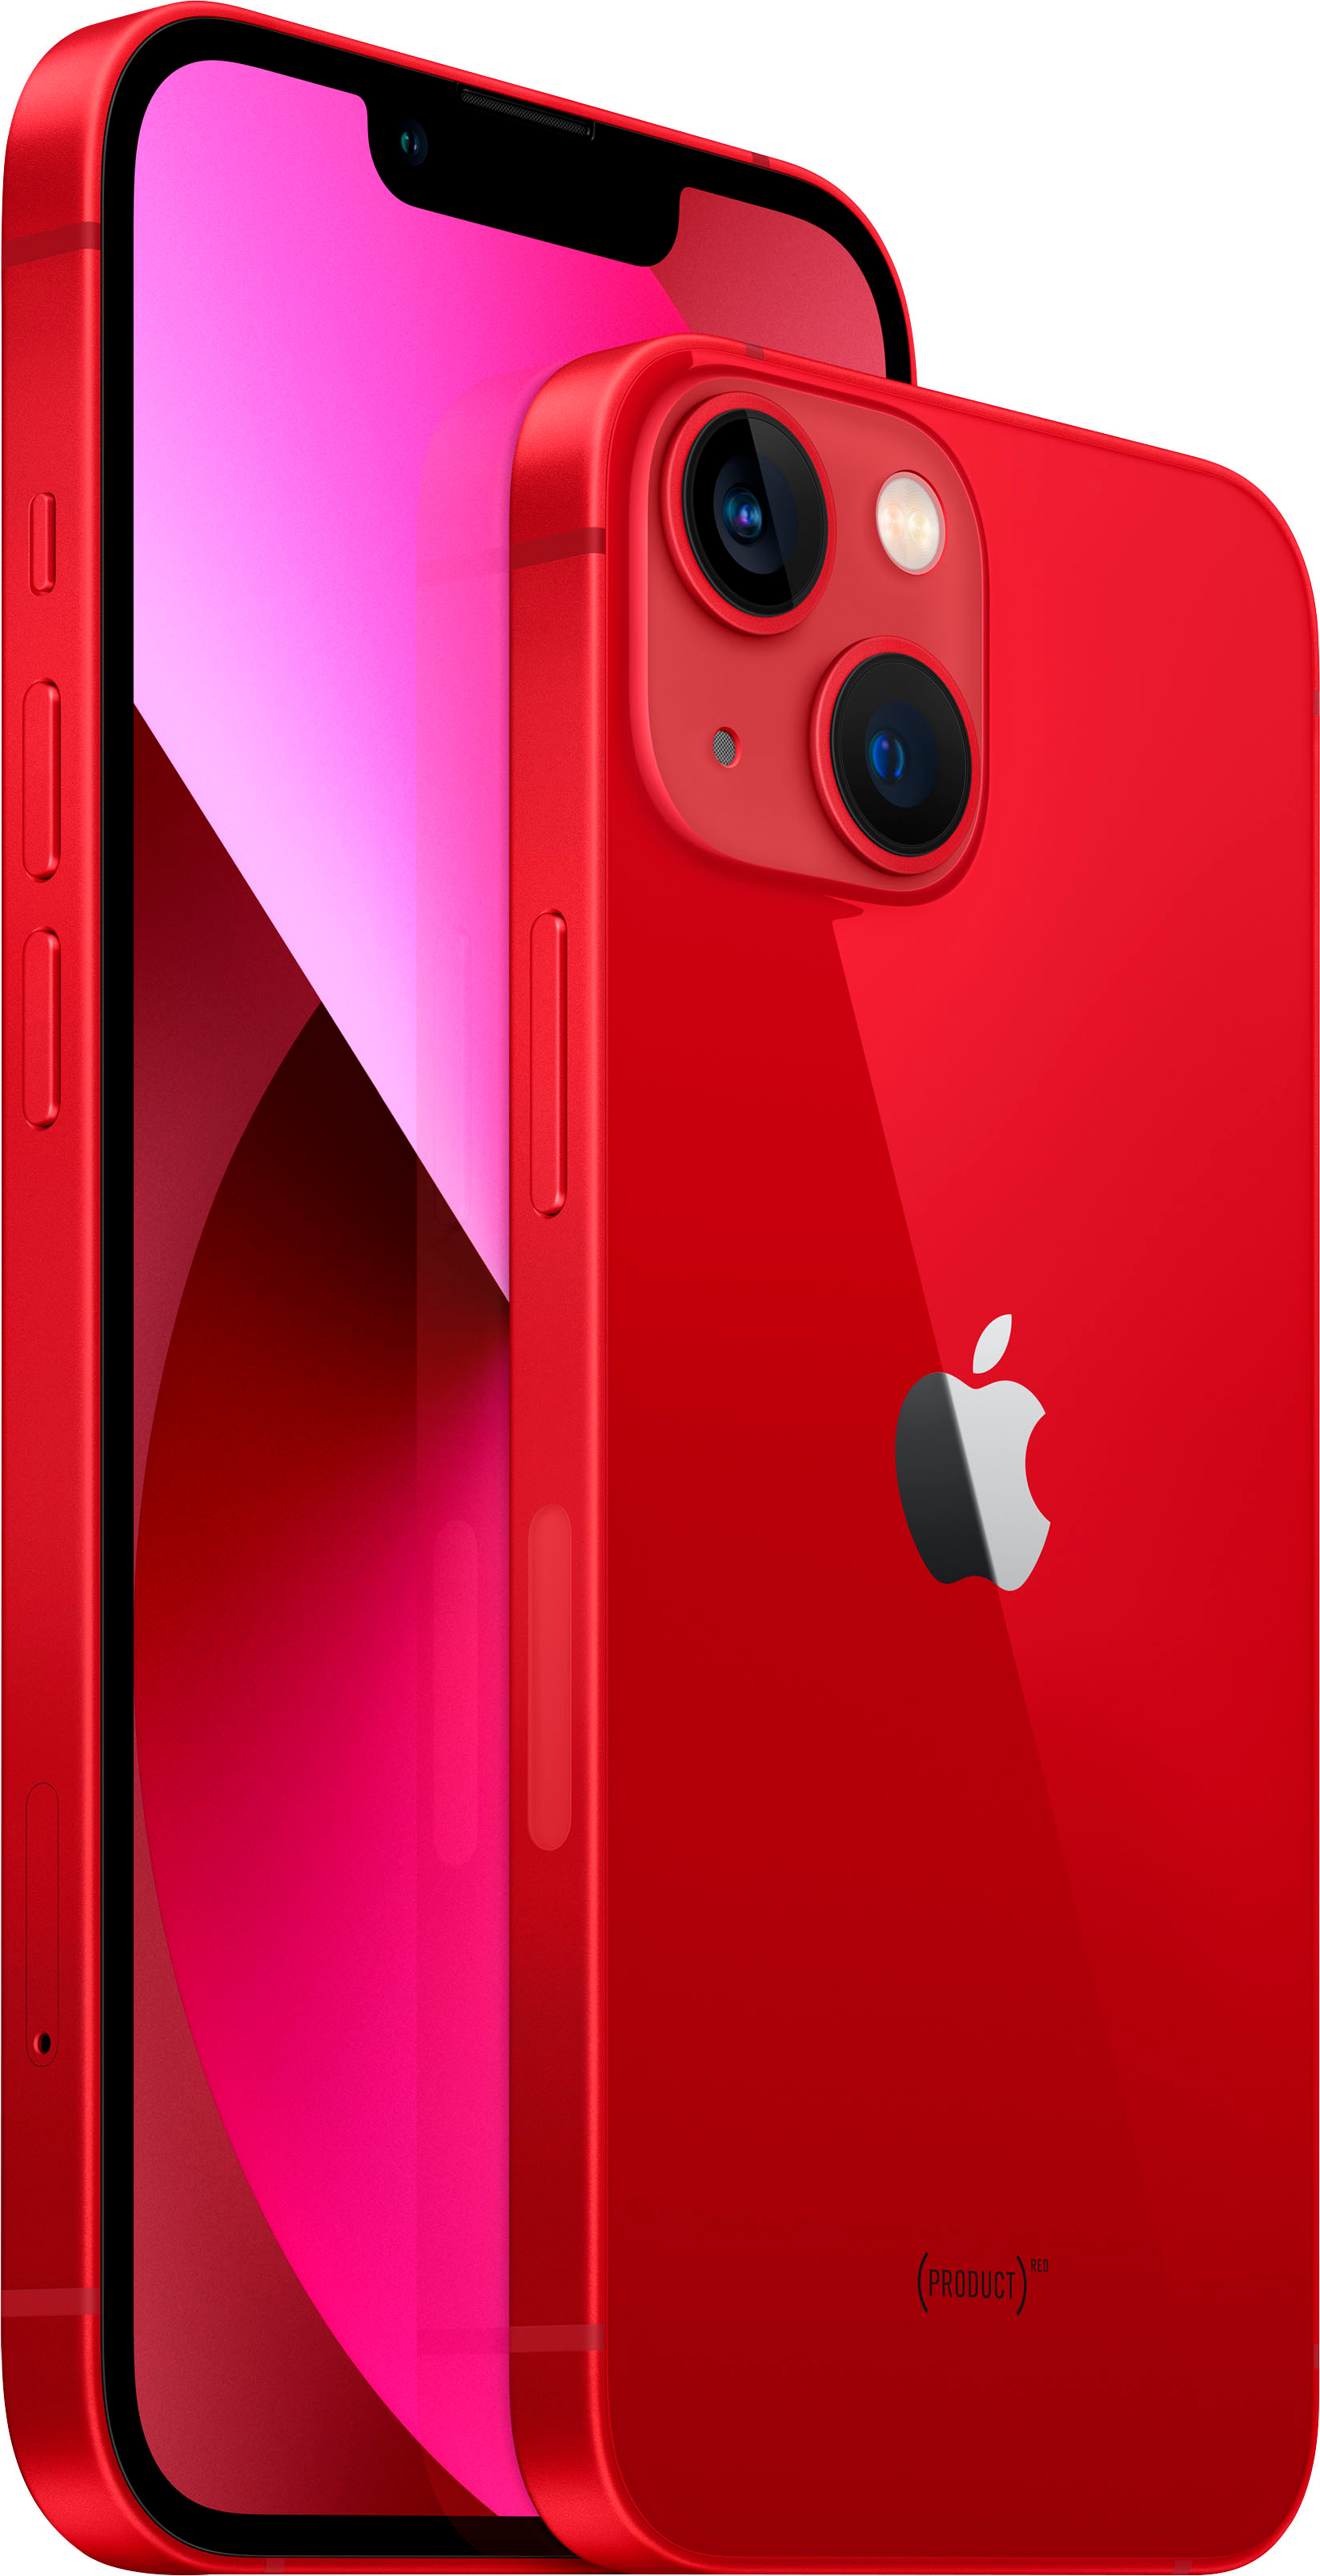 Best 13 Buy 5G (Unlocked) (PRODUCT)RED Apple iPhone - MMM93LL/A 128GB